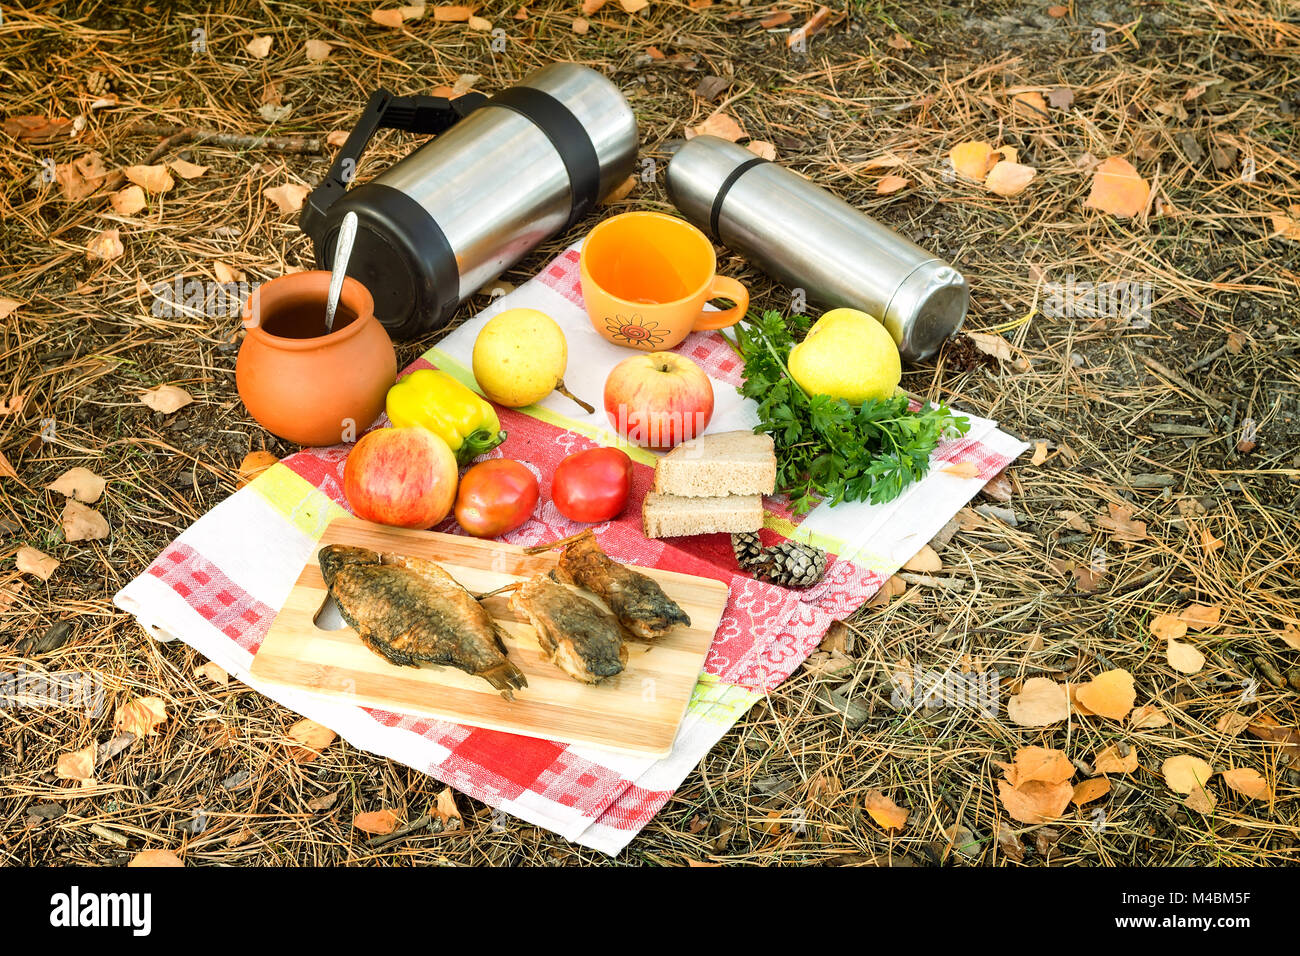 Coffee and food for a picnic in the woods Stock Photo